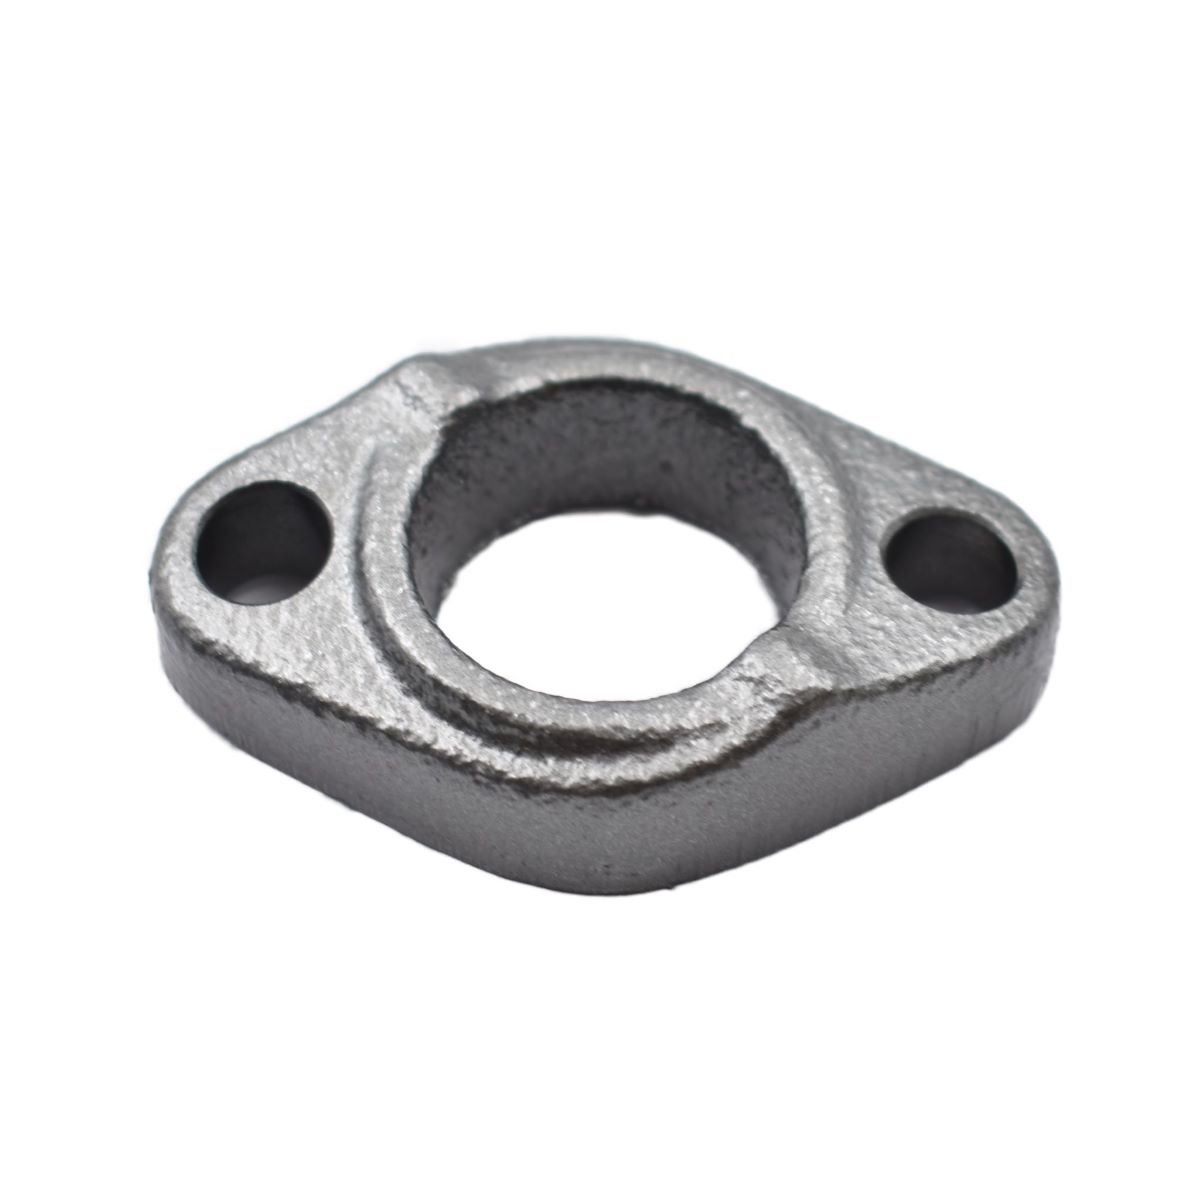 atomizer flange flange atomizer cap retainer mini tractor mini tractor 101147-11900 101147-1190-0 10114711900 Atomizer retainer Yanmar (original) Additional info: Fits or multiple Yanmar types Dimensions: Diameter internally: 25mm Center to center bolts: 45mm Height: 13mm